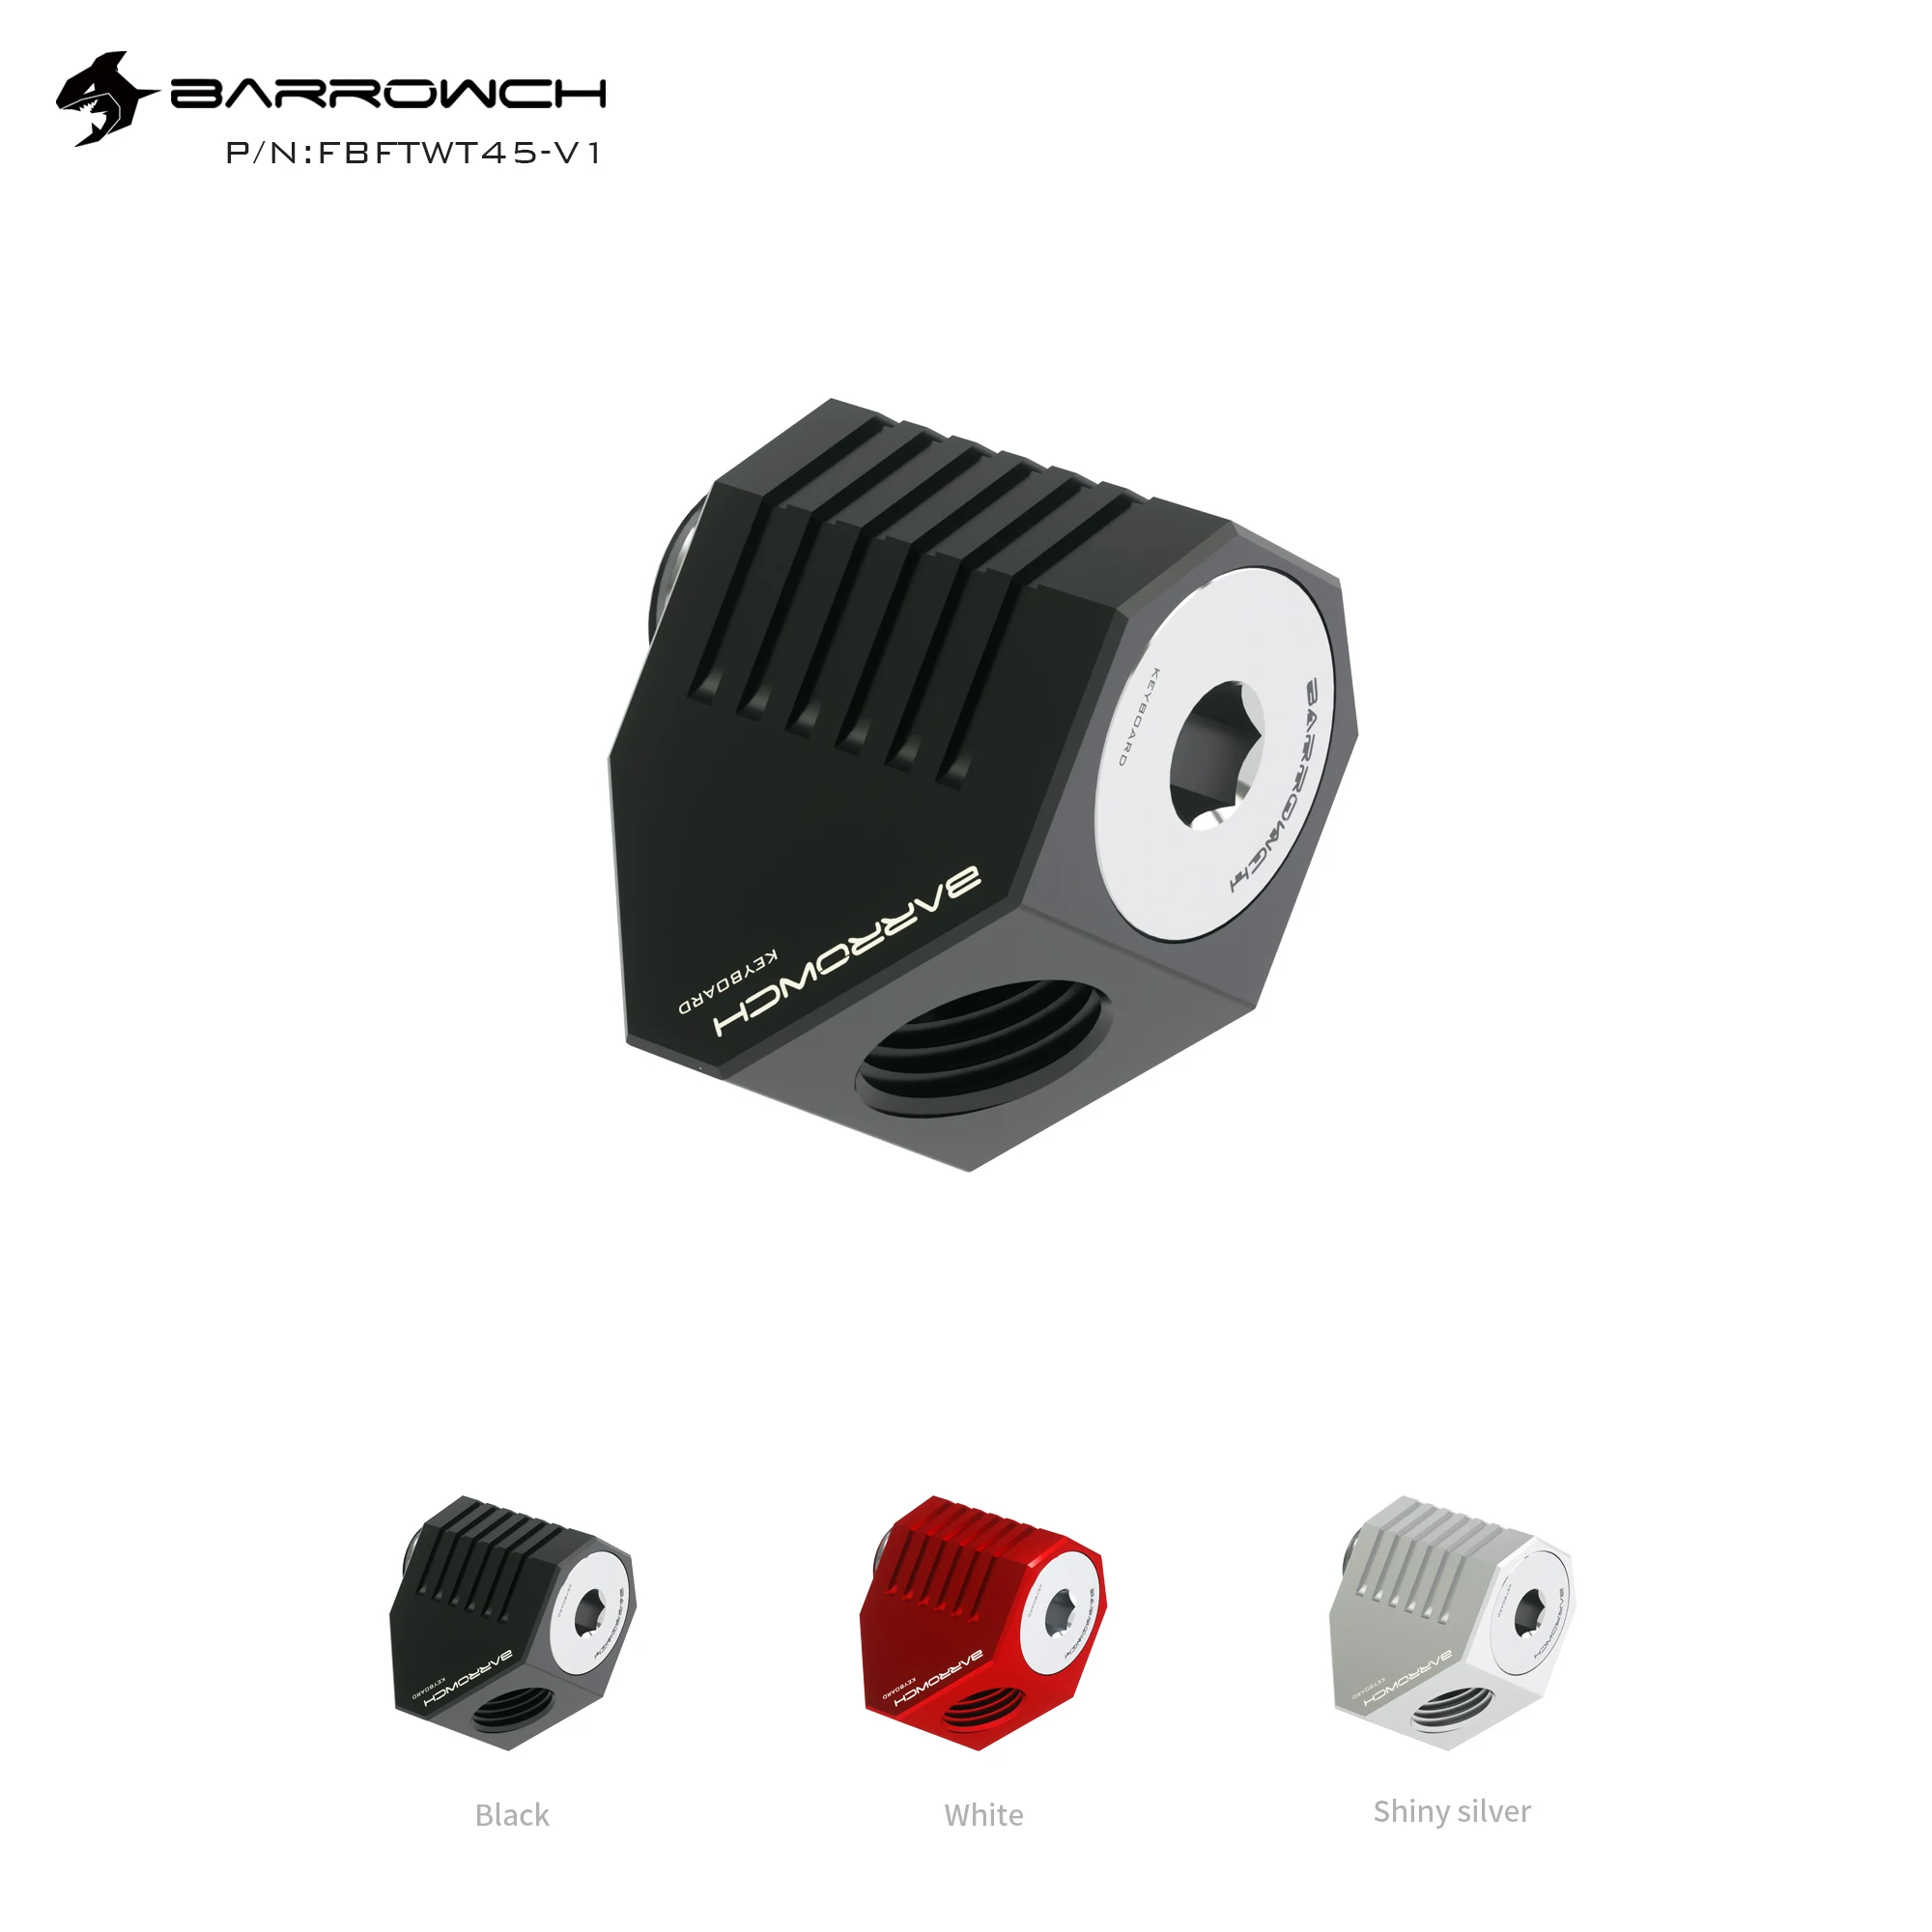 

Barrowch 45°Rotary Adapter 'G1/4' Thread Red/black/silver with Water Cooling Adaptors Metal Male To Famale FBFTWT45-V1